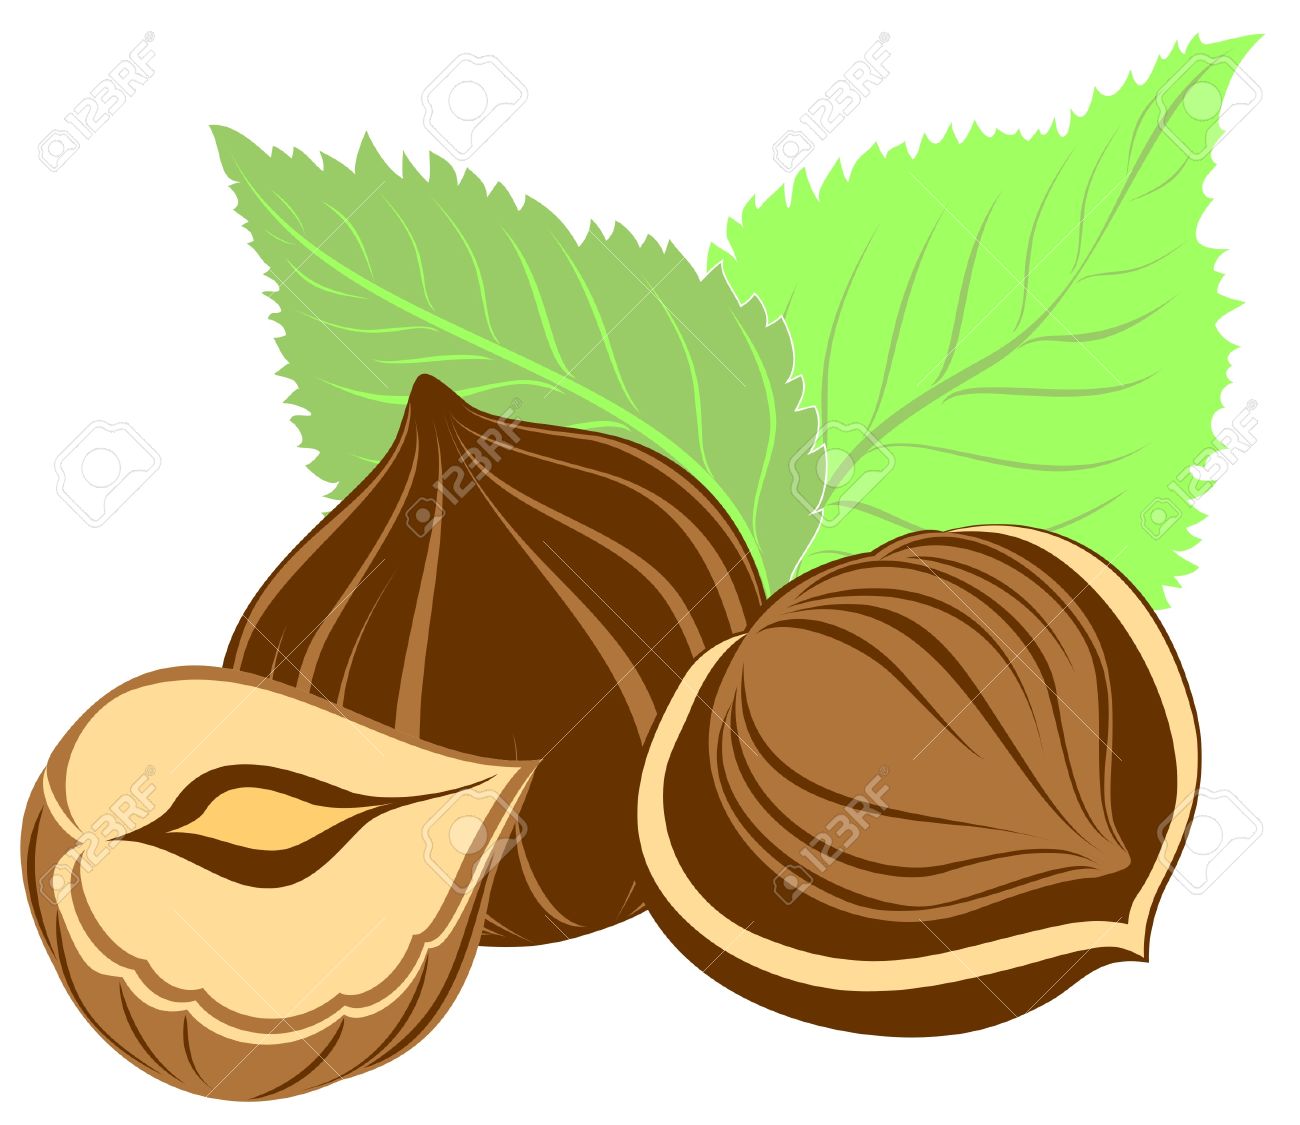 clipart of tree nuts - photo #43